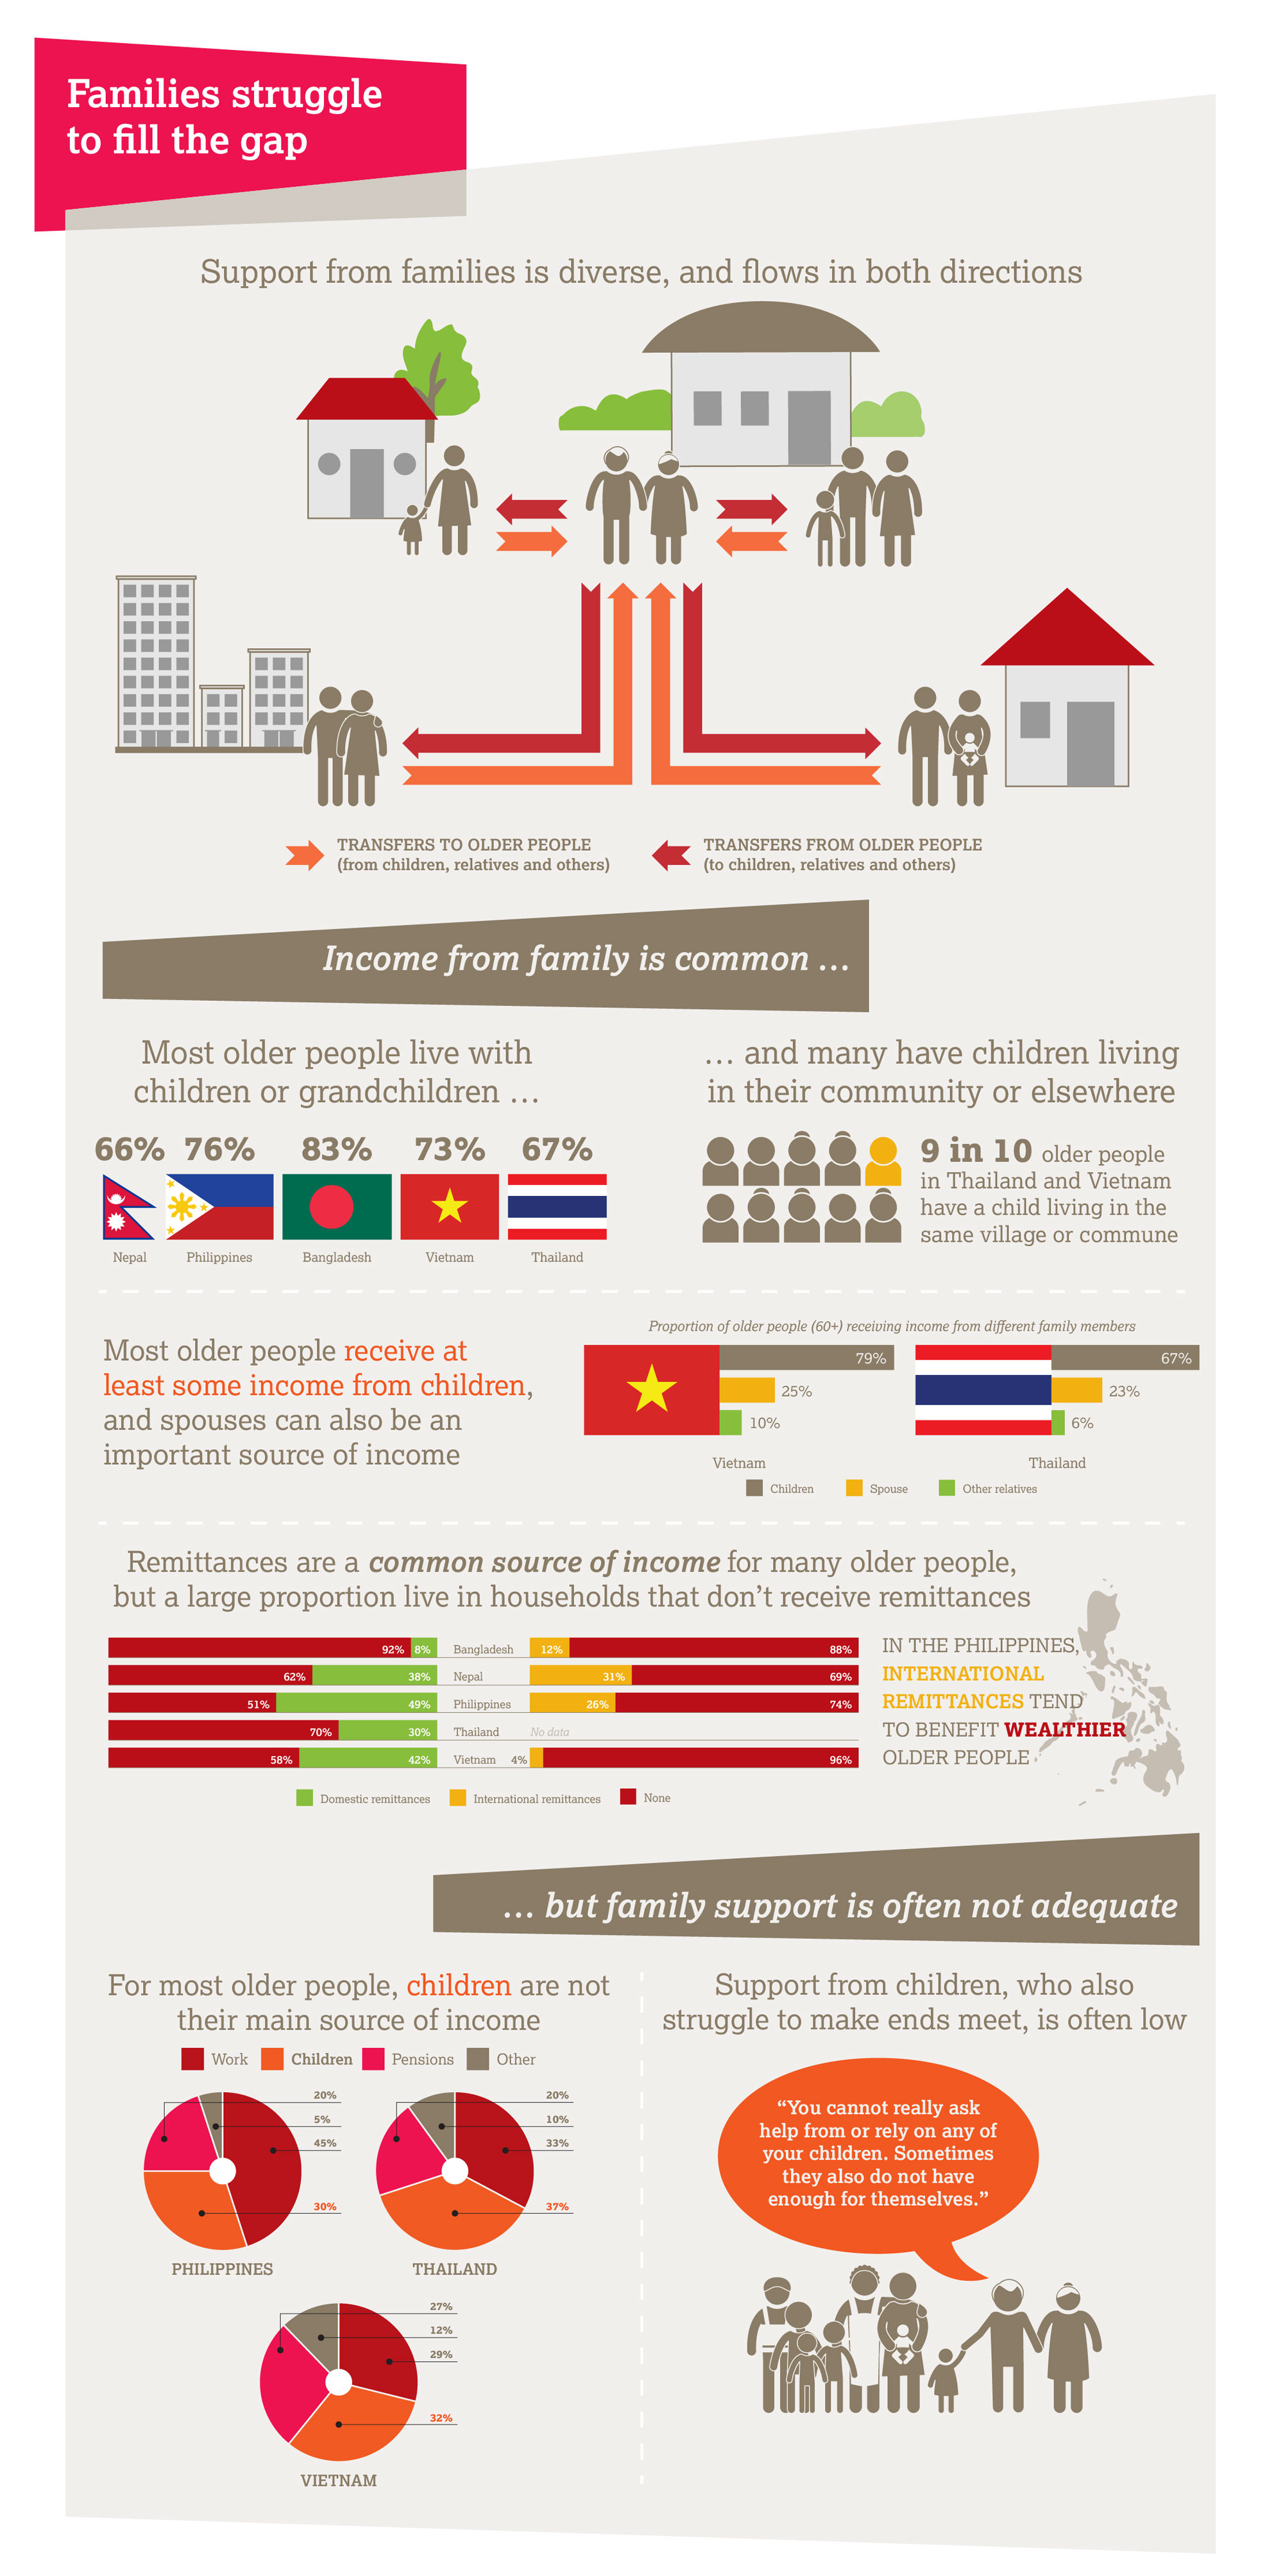  _139_https://www.helpage.org/silo/images/work-family-and-social-protection-infographic-2_2000x4015.jpg